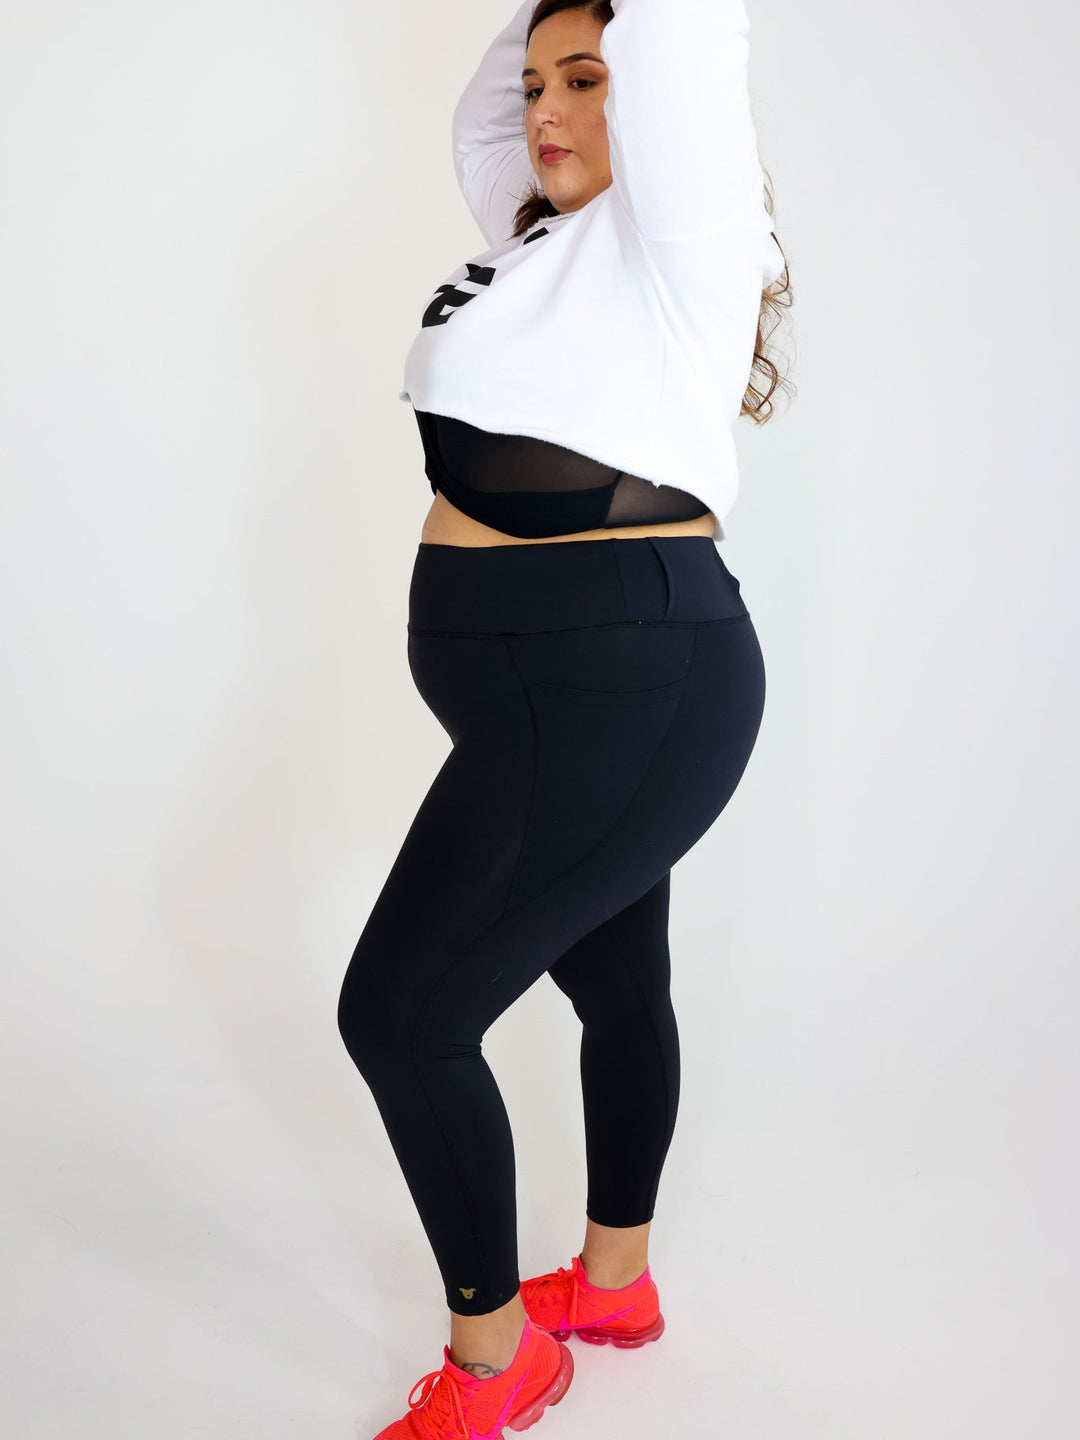 1 Pair of Leggings sent to you every month in your VIP package. Let us  choose our most popular style for you